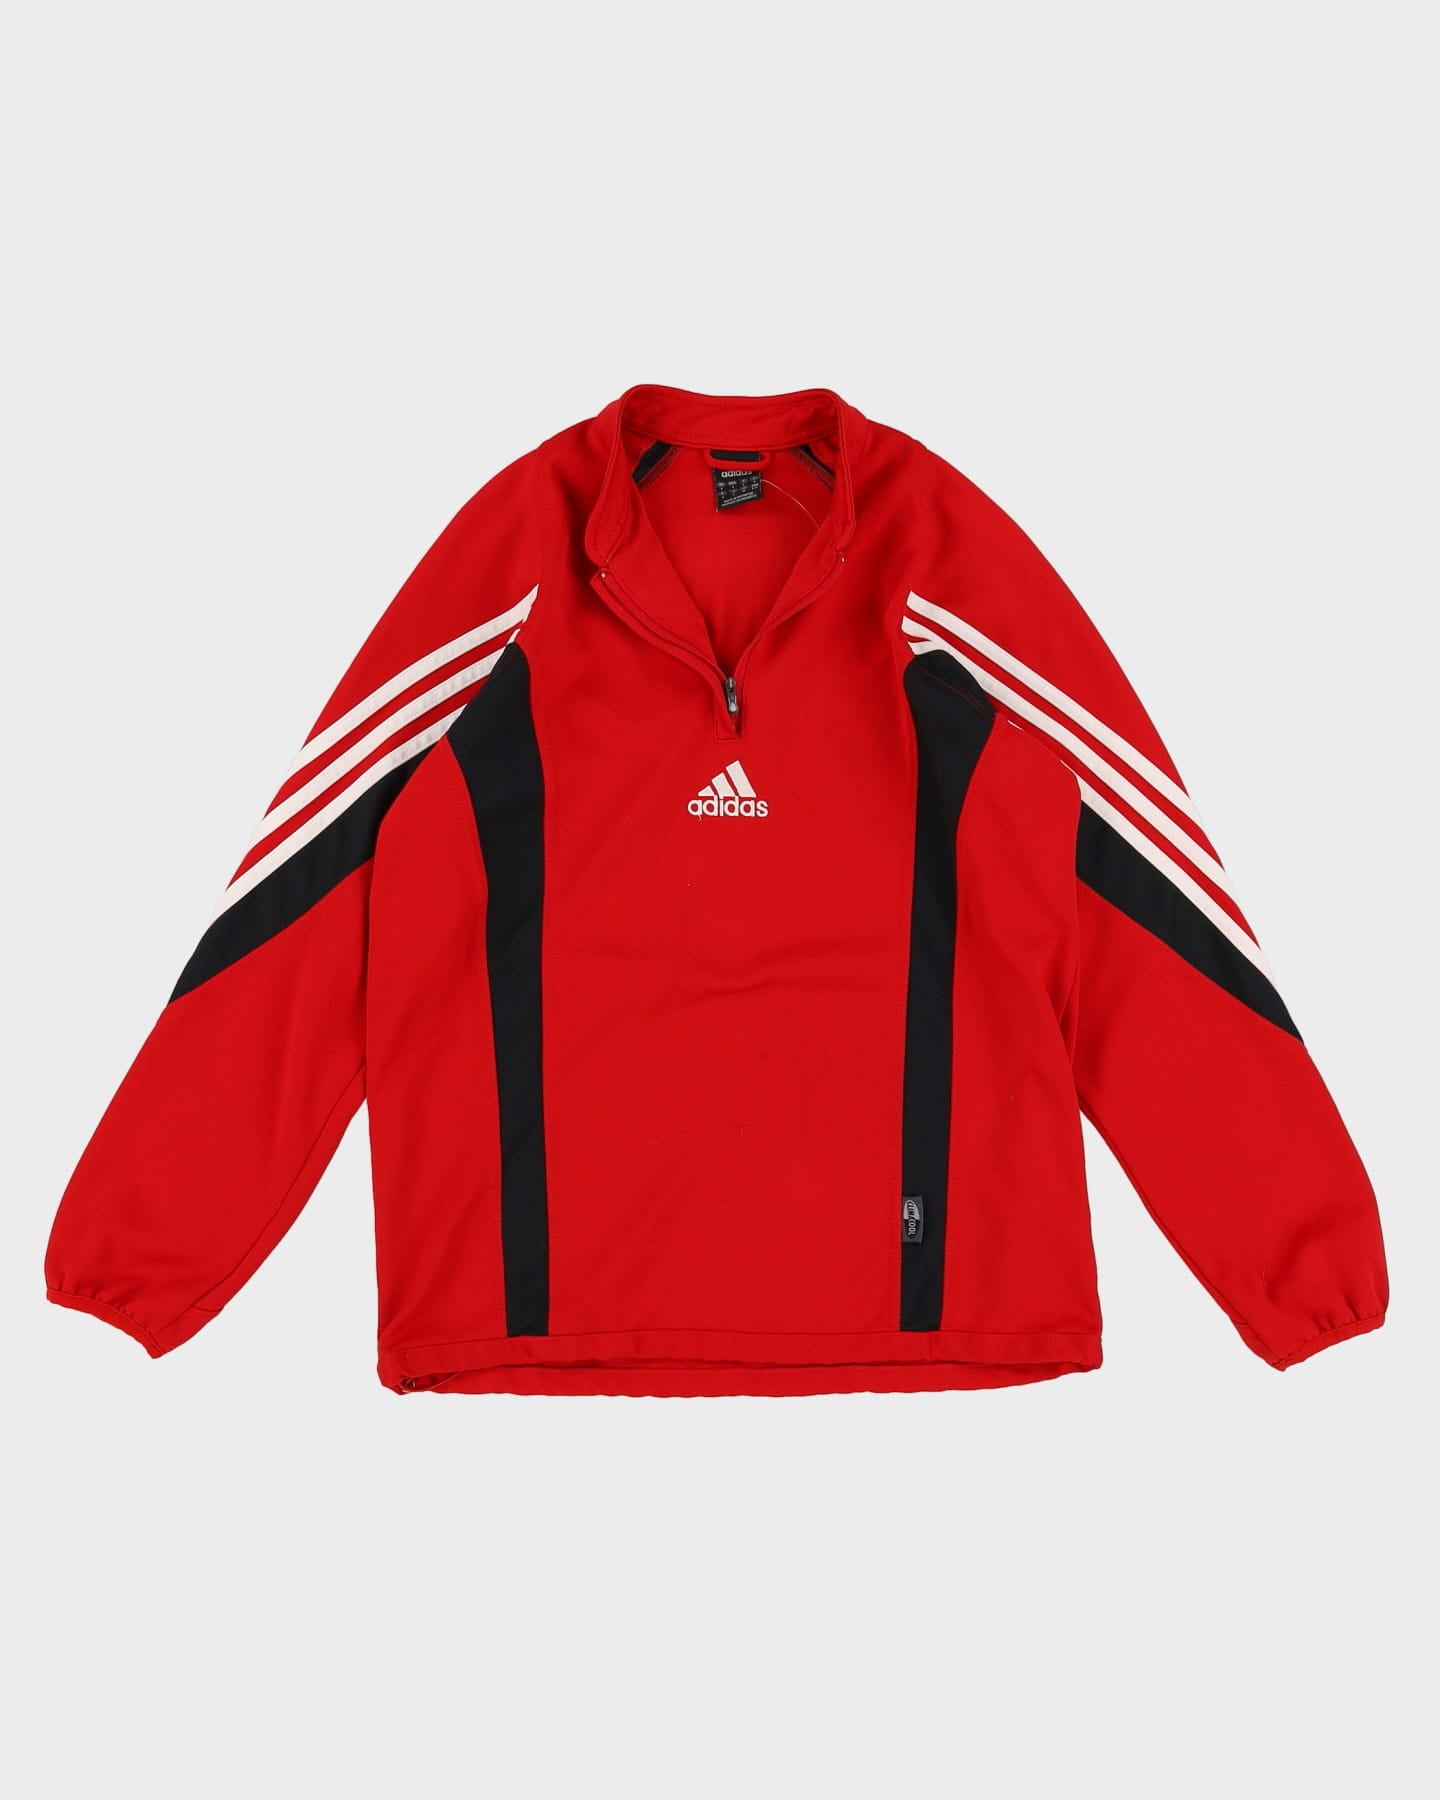 Adidas Red Track Jacket - S